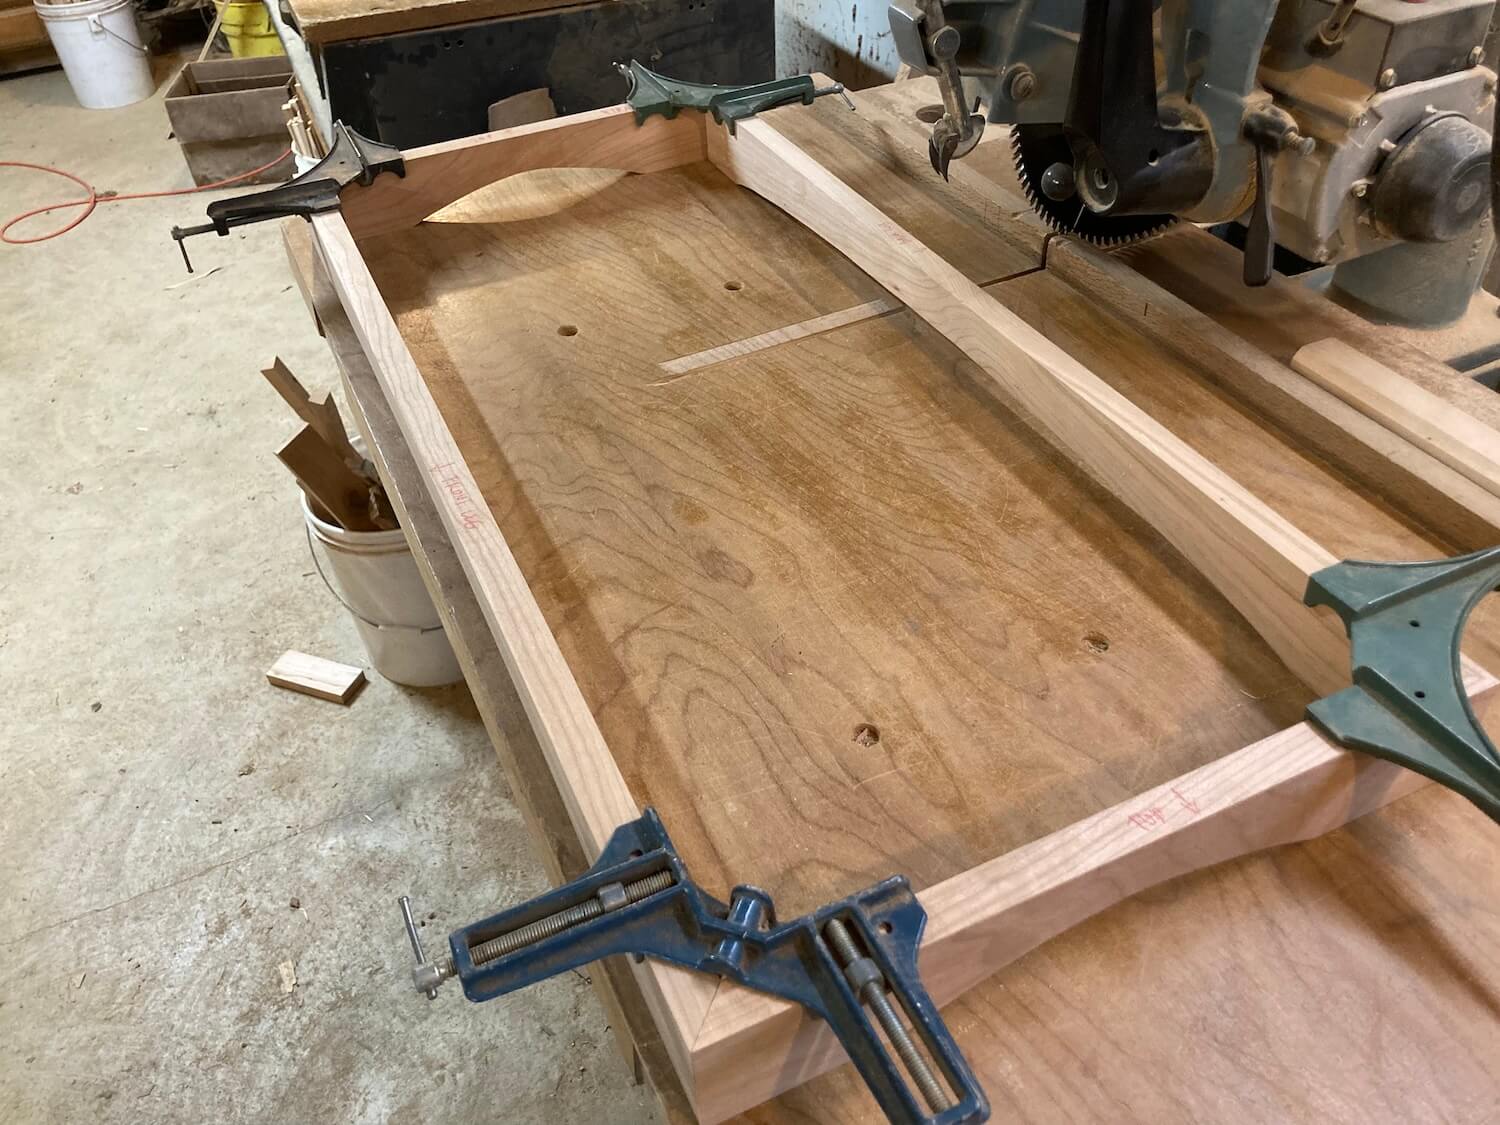 Building a hope chest